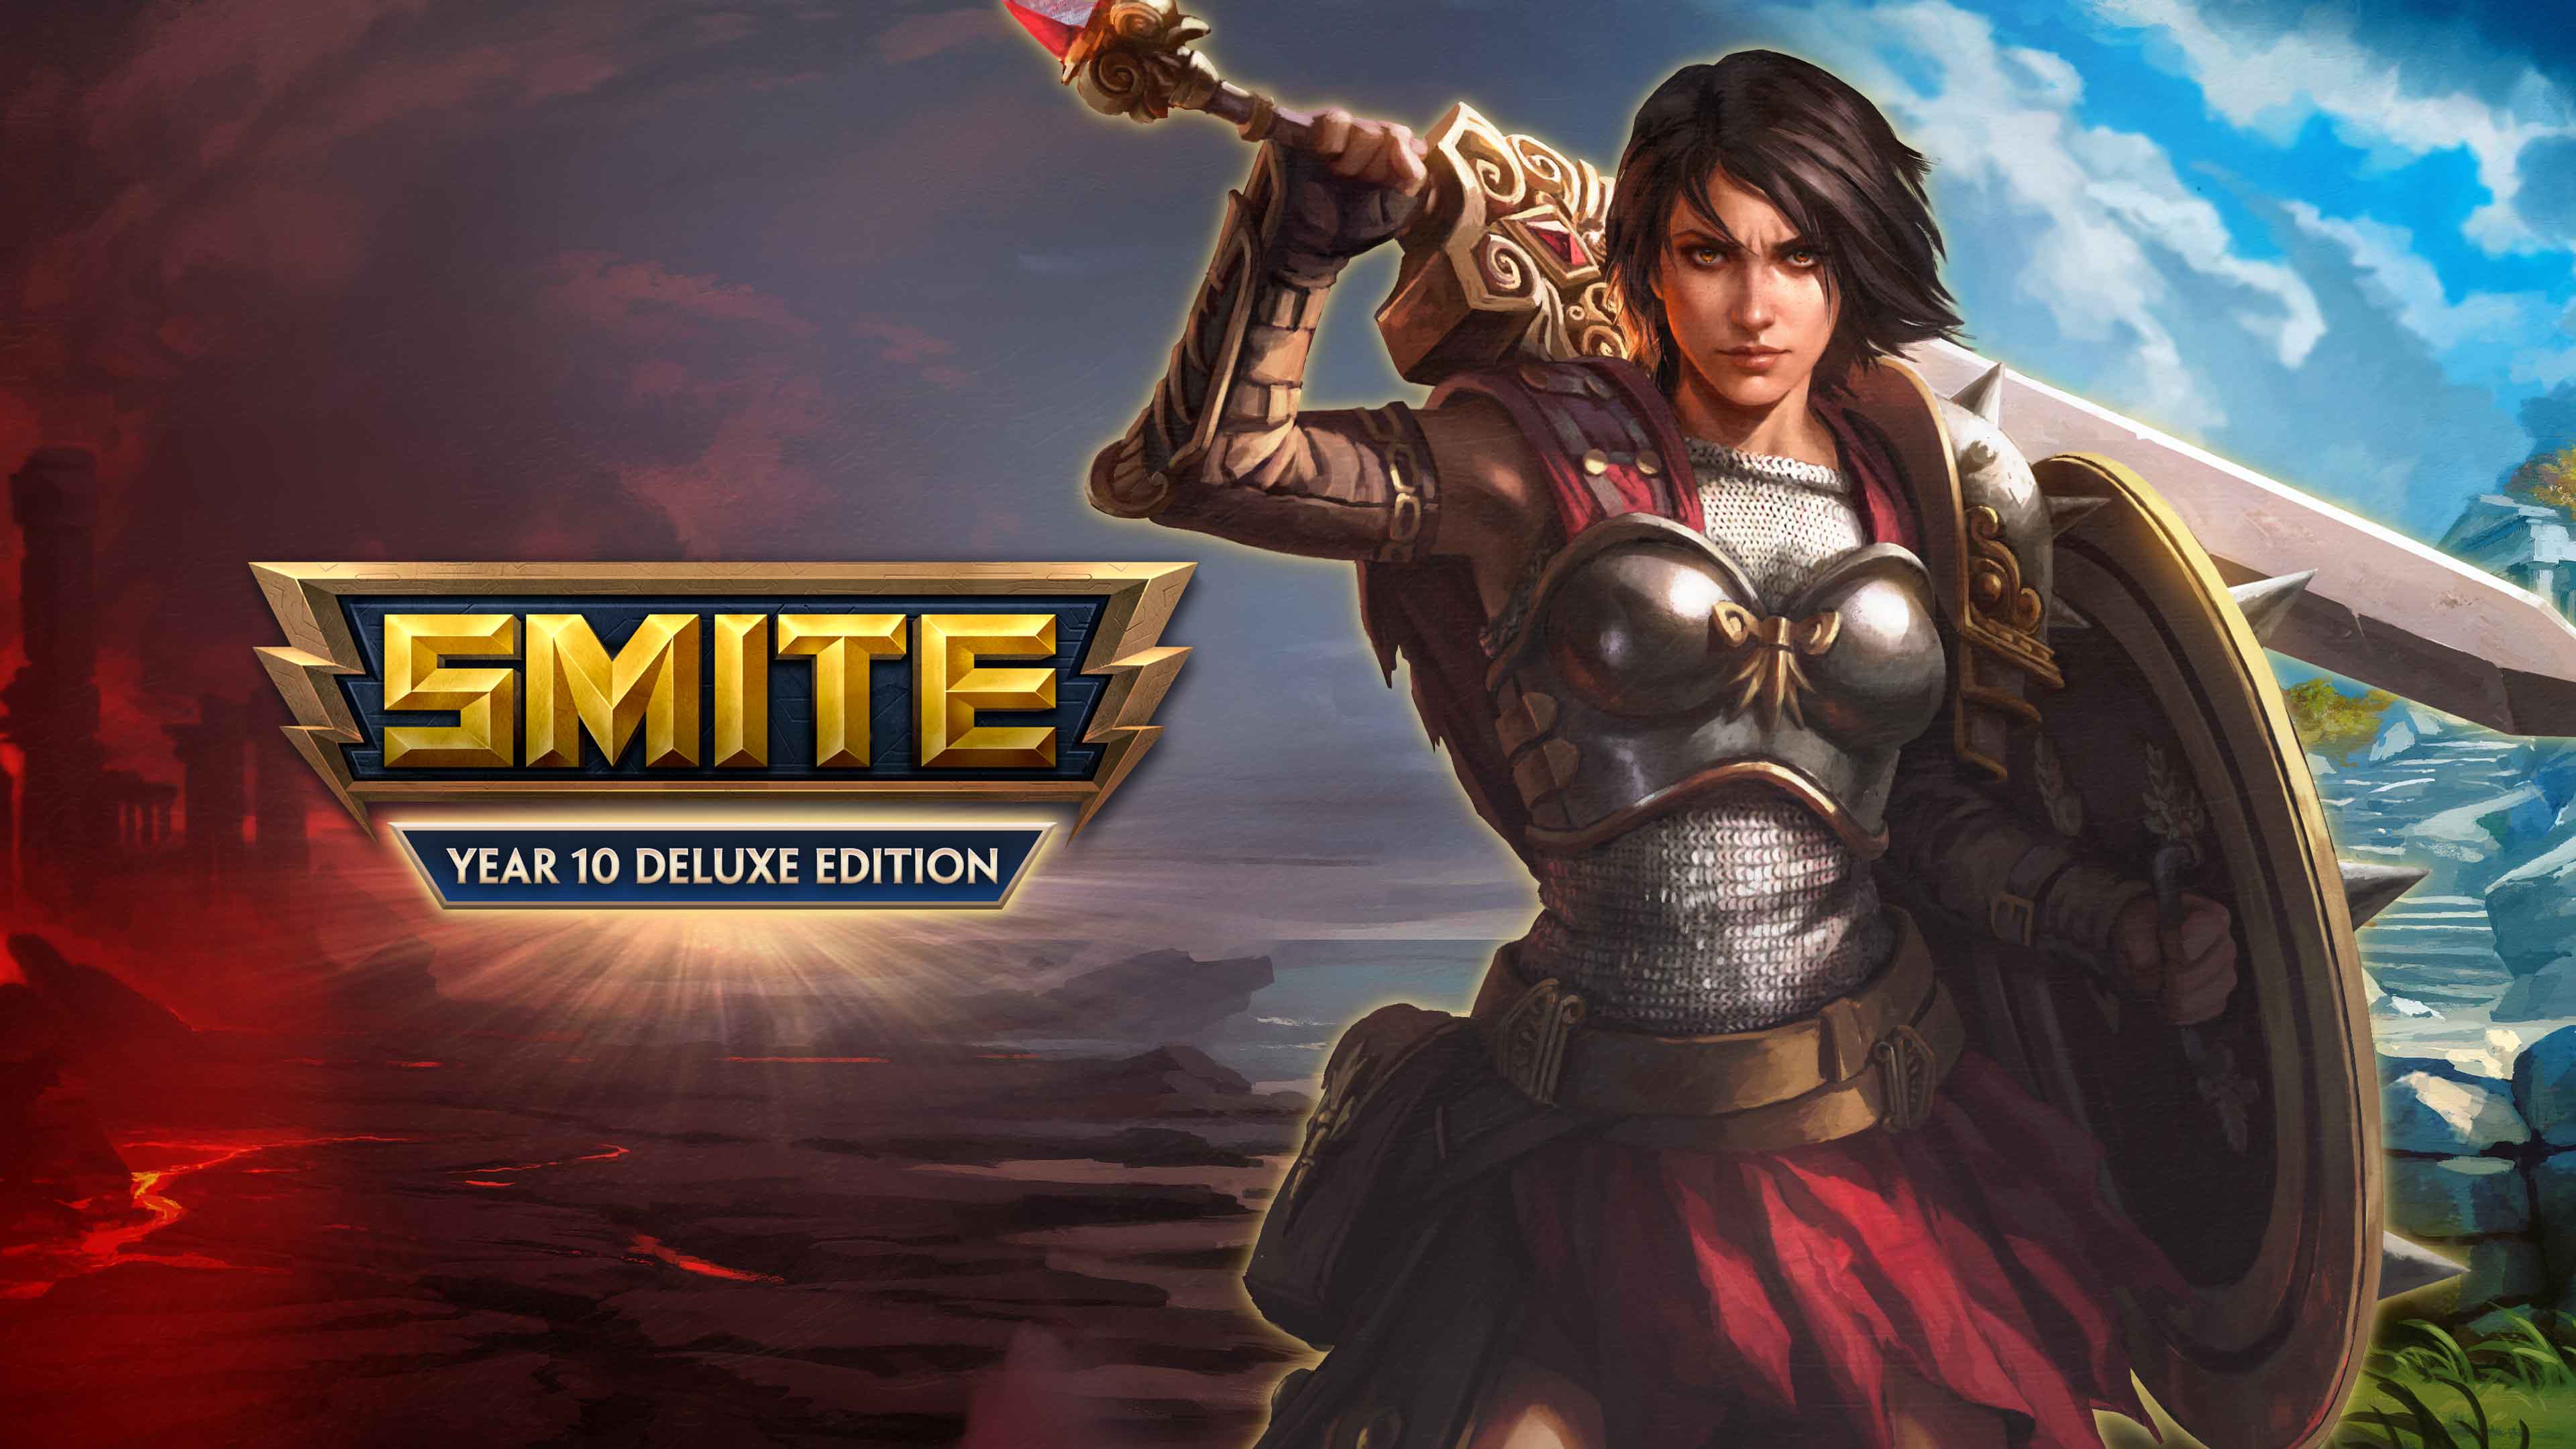 SMITE Year 10 Deluxe Edition (Simplified Chinese, English)